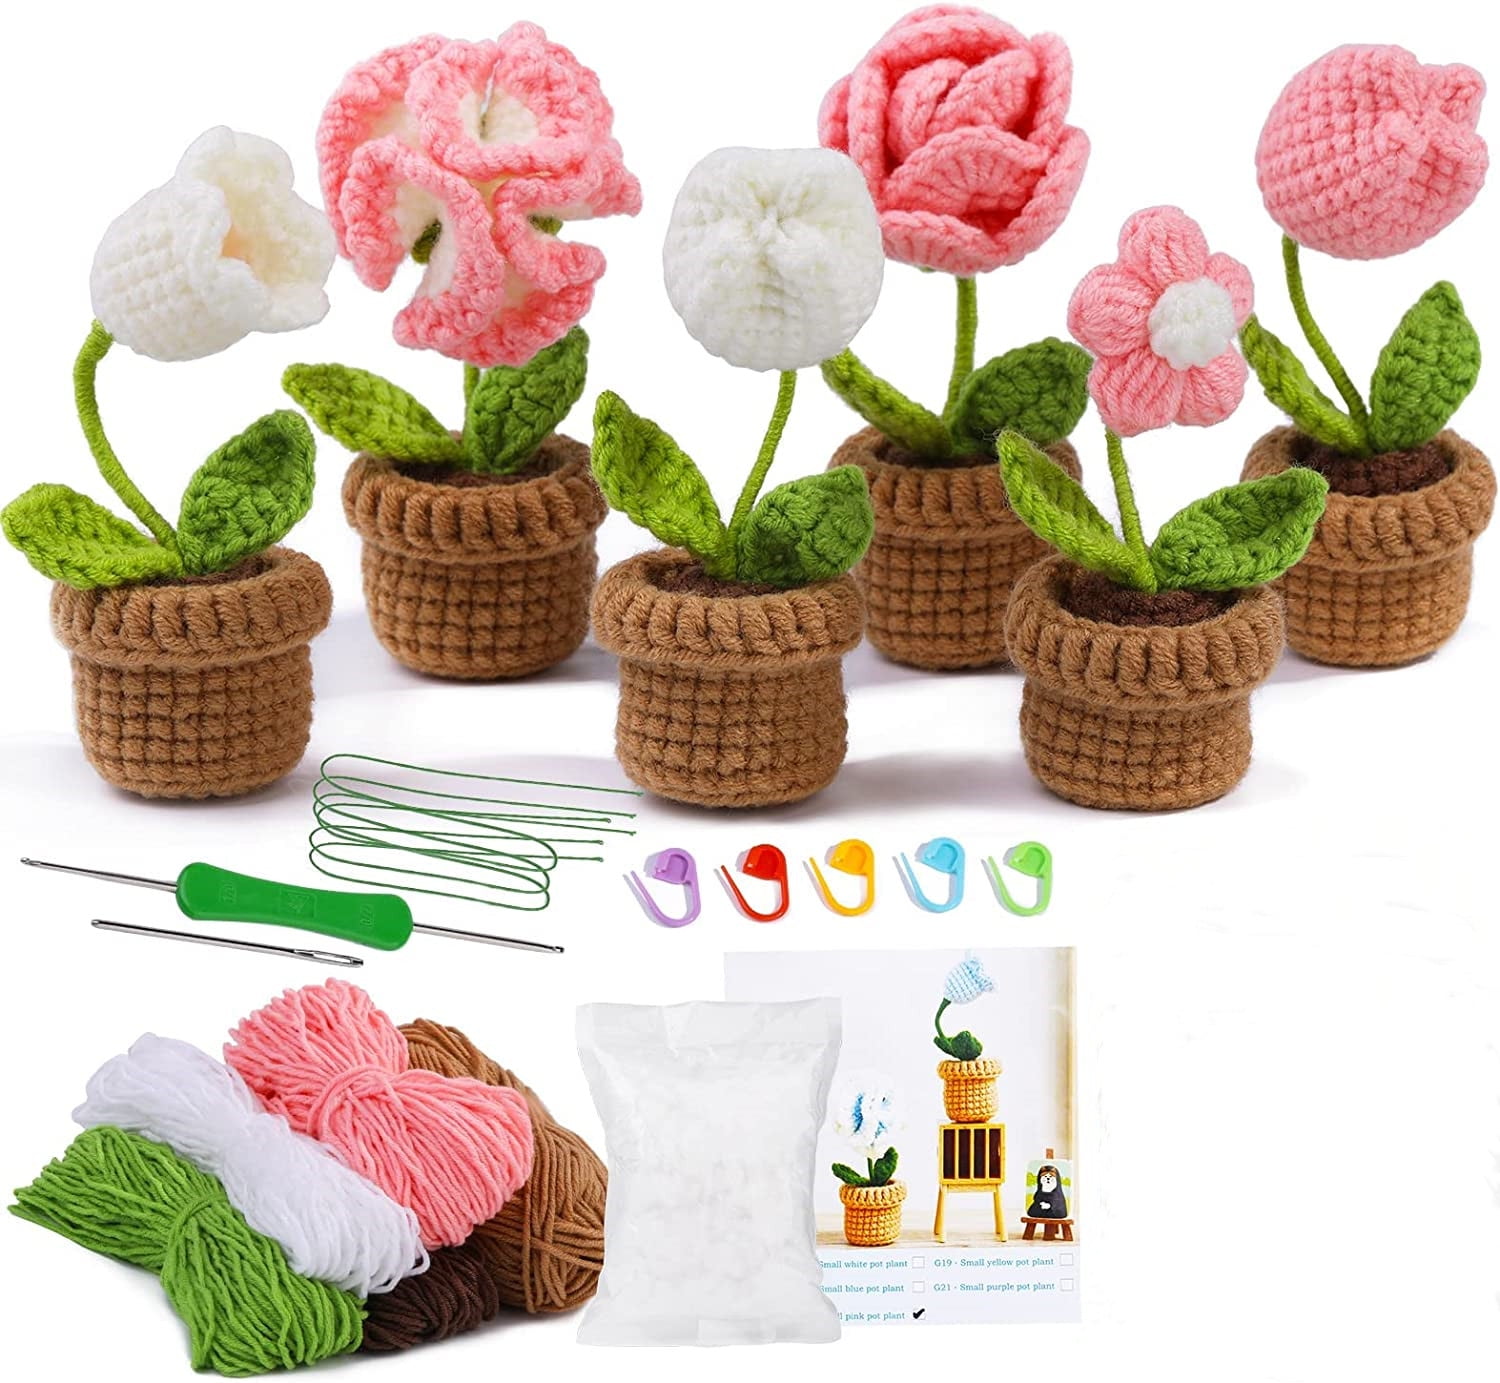 Jtween Potted Flowers Crochet Kit Complete Crochet Kit for Beginners,Potted Flowers Kit for Beginers and Experts with Step-by-Step Video Tutorials